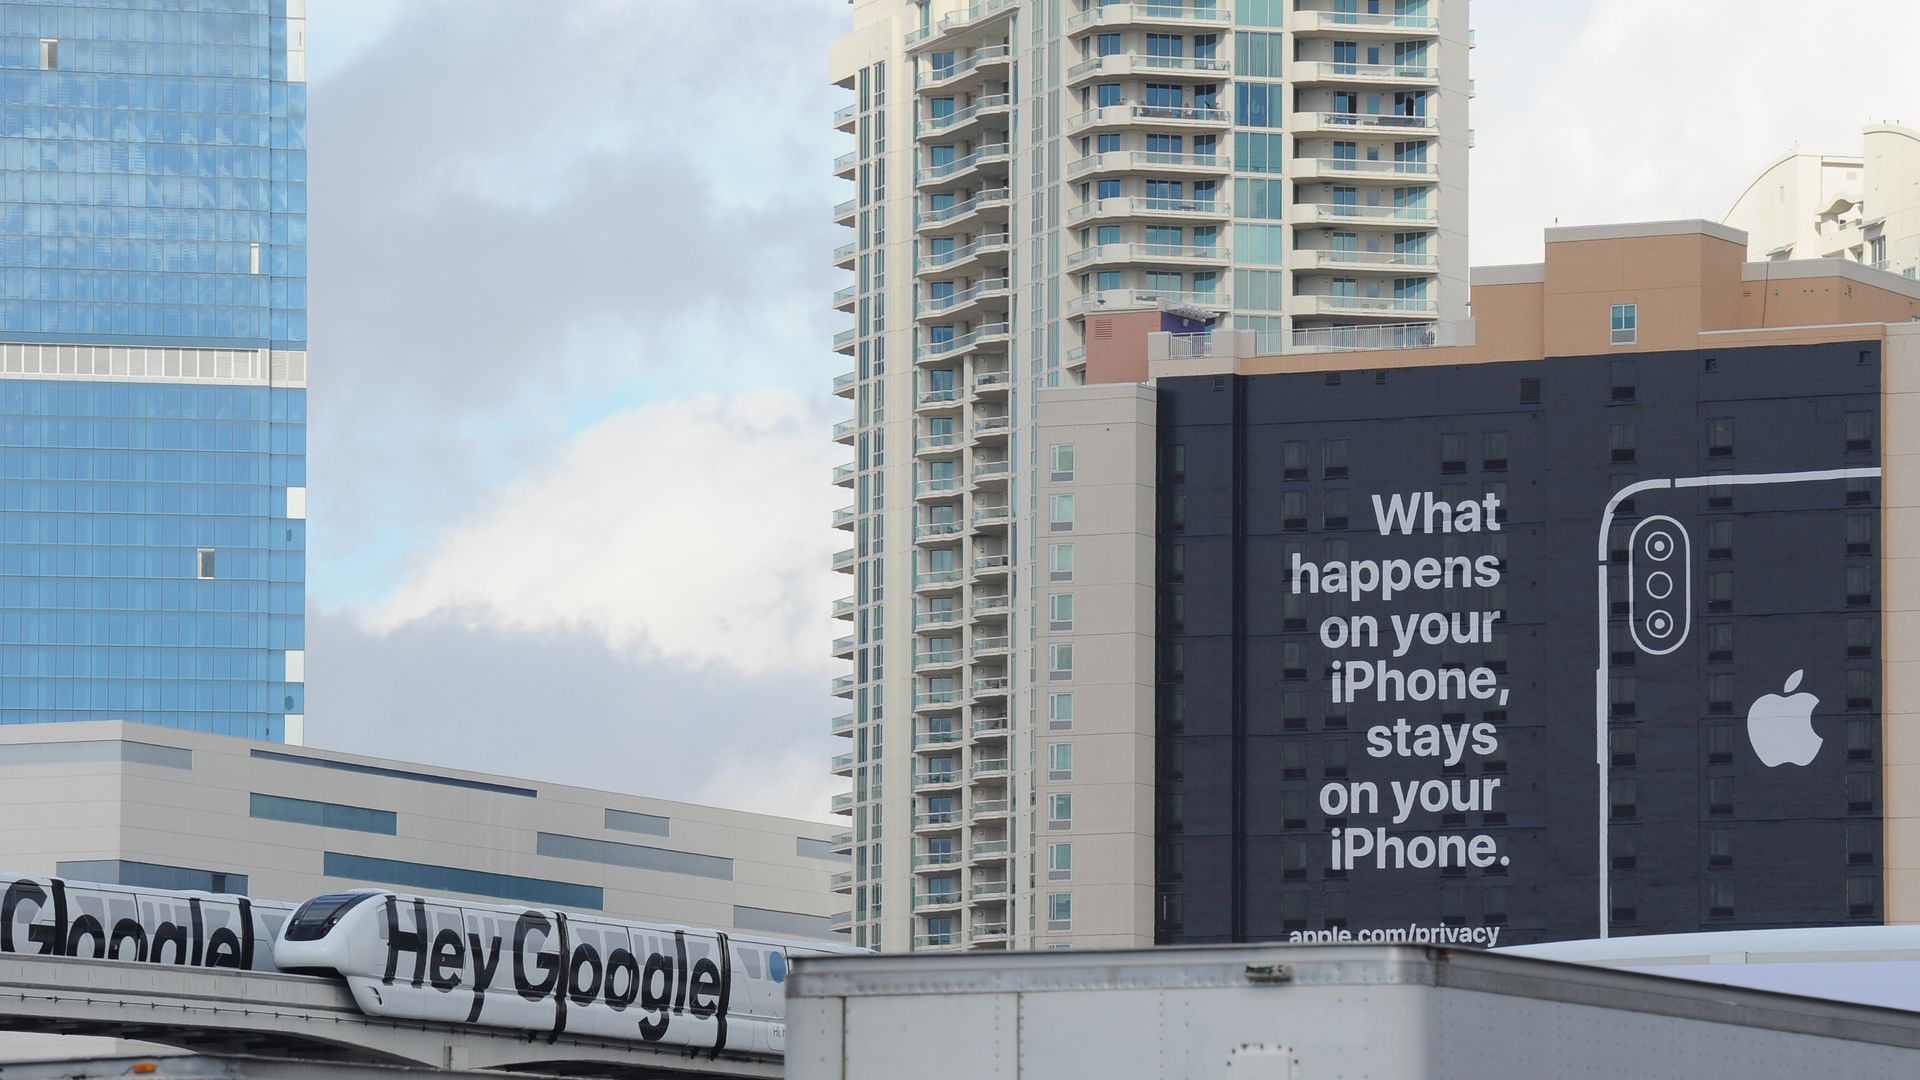 An ad that says "What happens on your iPhone, stays on your iPhone" next to a monorail that says "Hey Google"